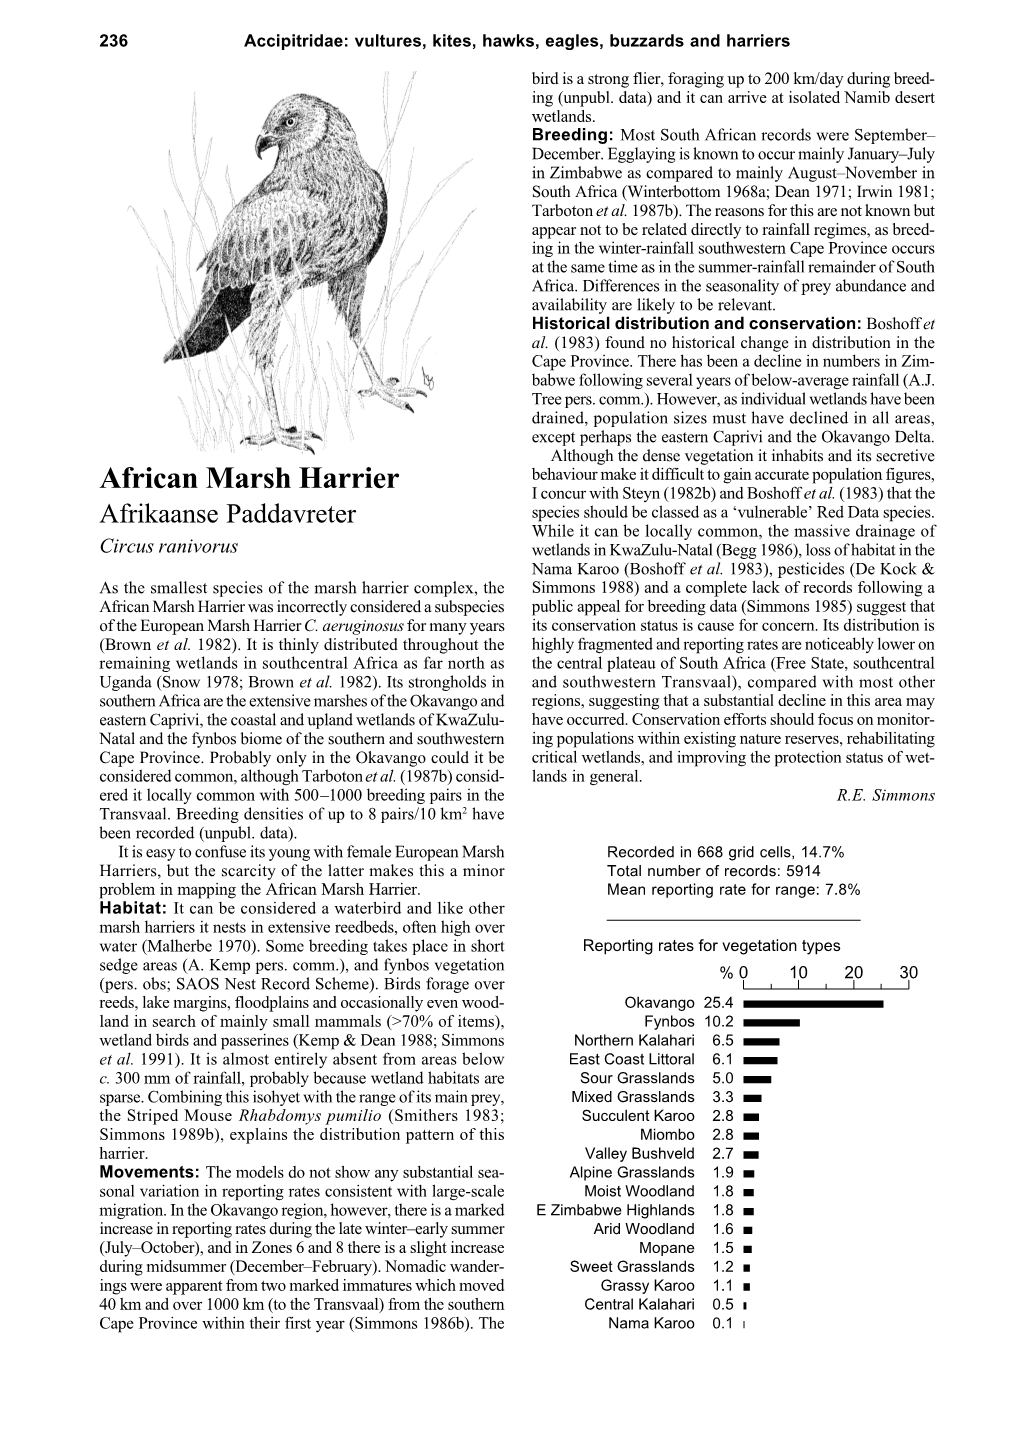 African Marsh Harrier I Concur with Steyn (1982B) and Boshoff Et Al